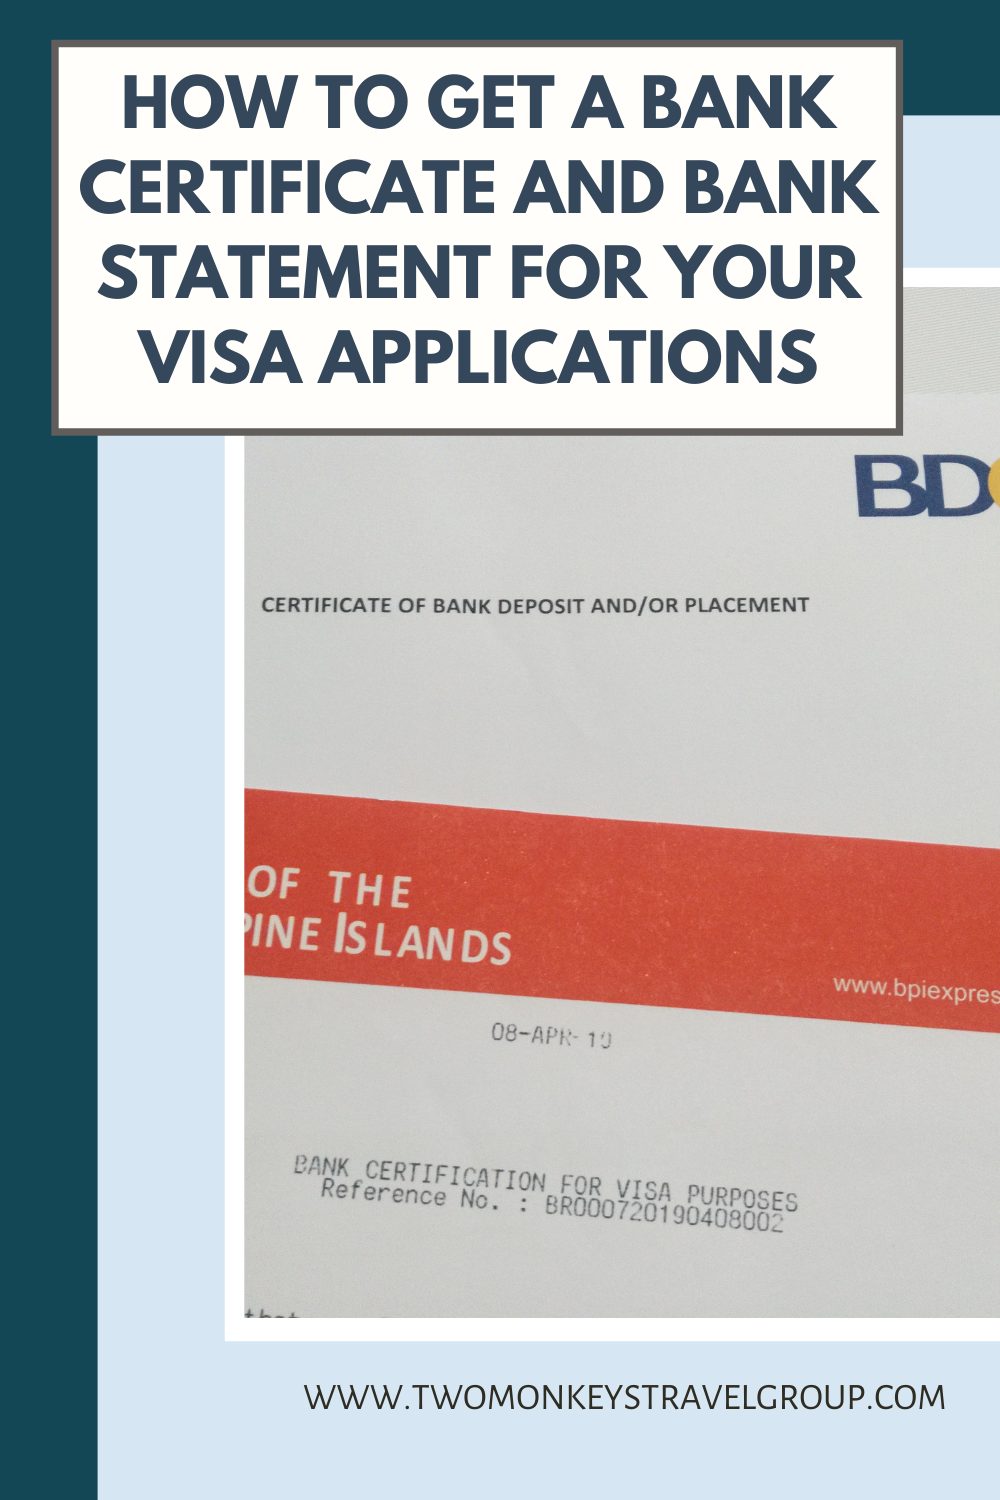 How To Get a Bank Certificate and Bank Statement for your Visa Applications